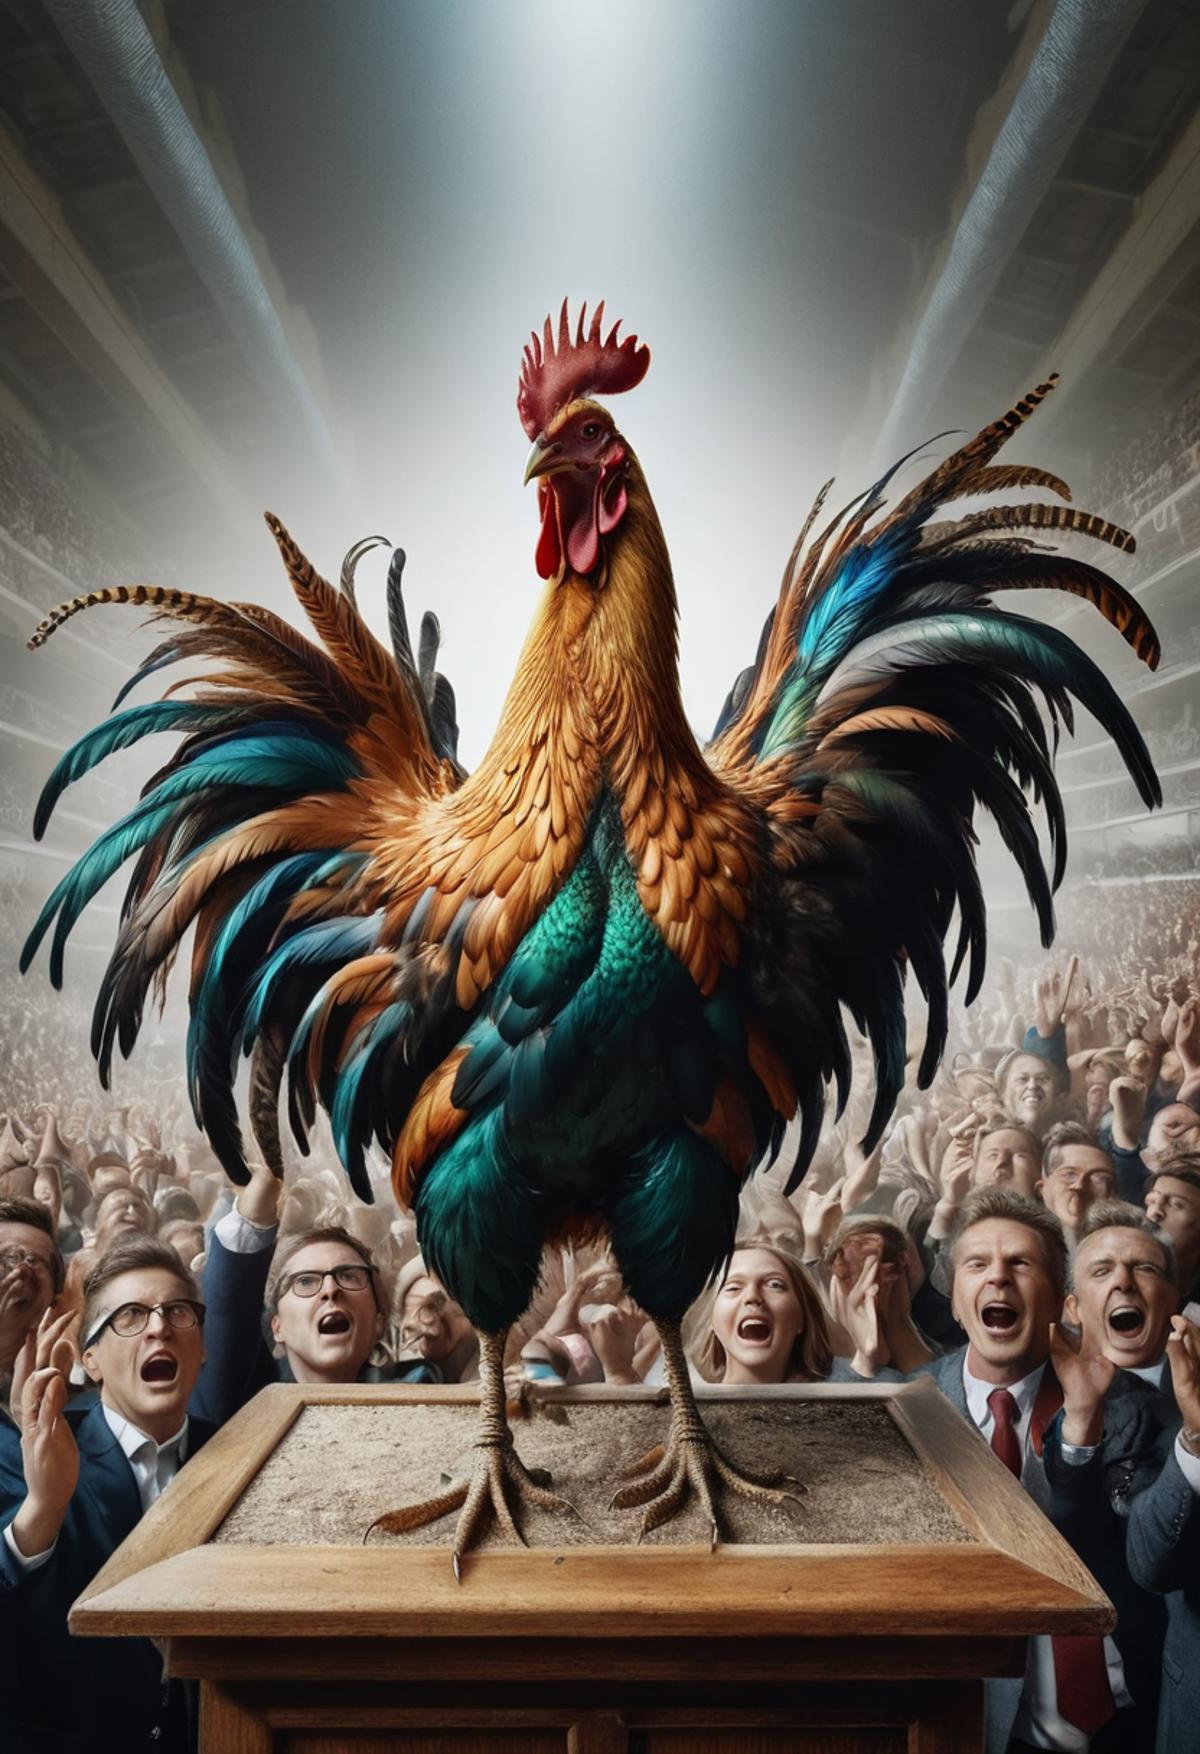 A Rooster Standing on a Table in Front of a Crowd of People.